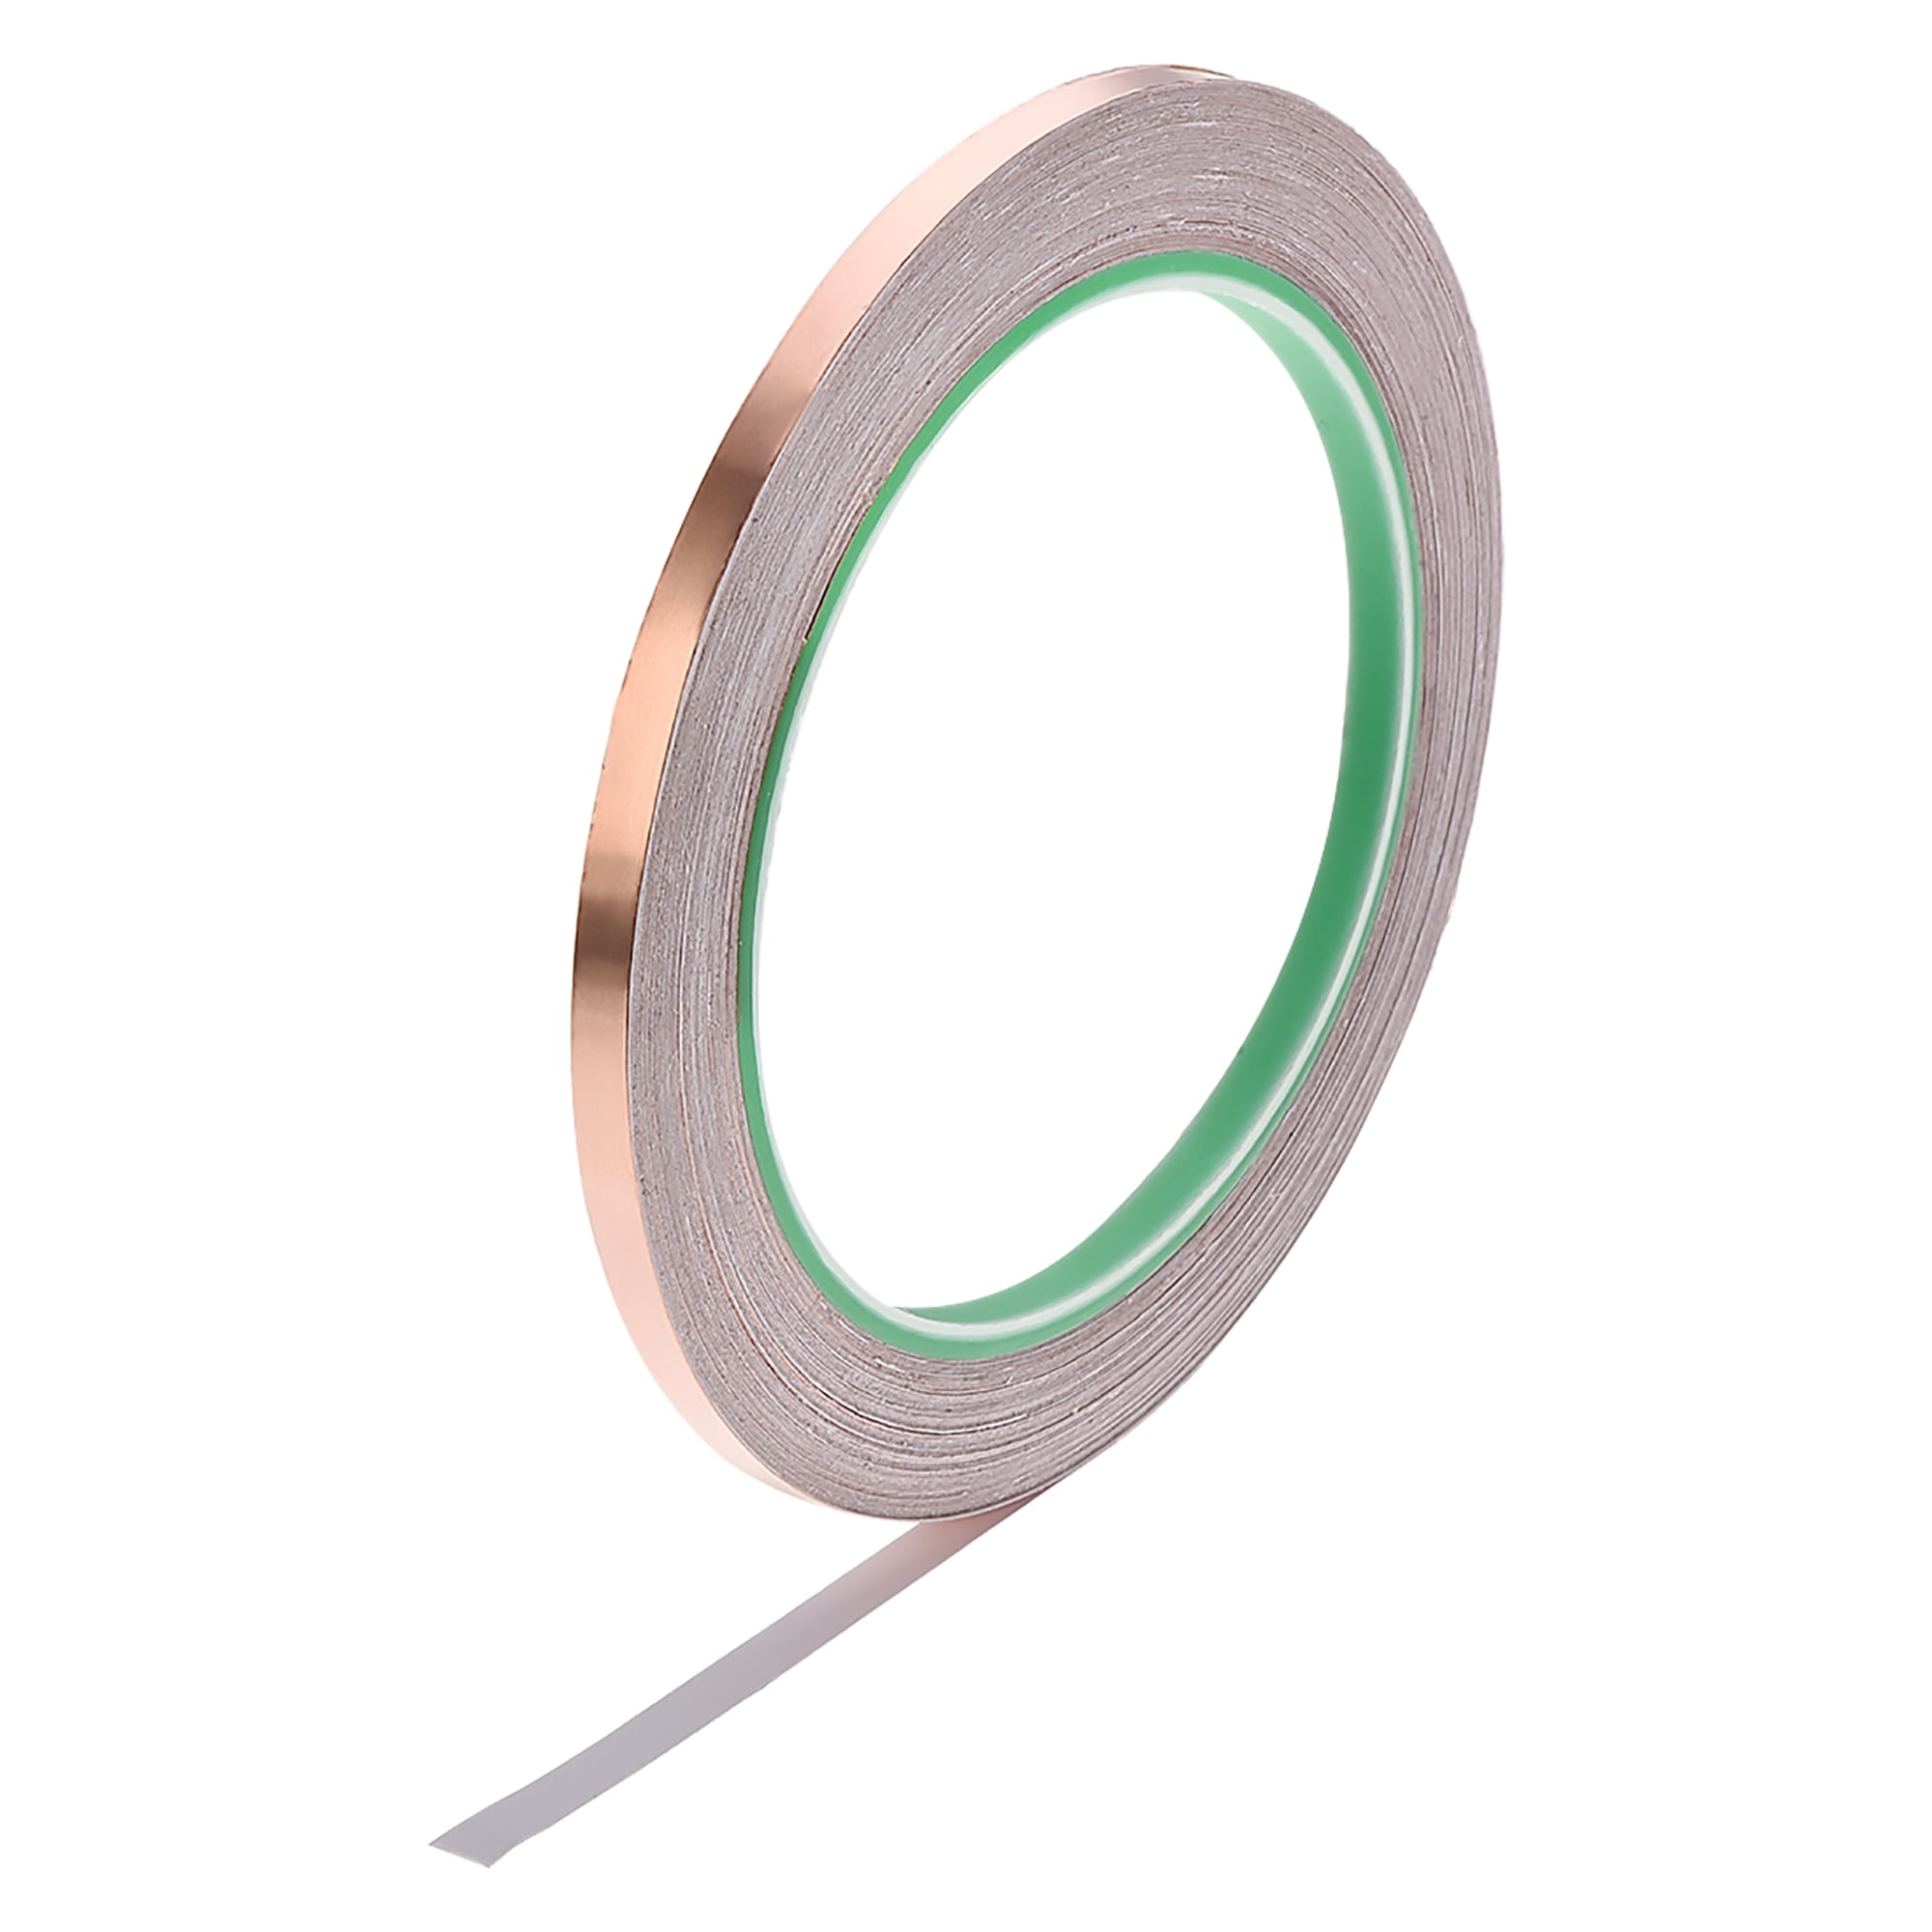 ICoolBear Copper Tape Single Sided Conductive Adhesive Foil Copper Tapes 2 Rolls 4 Sizes